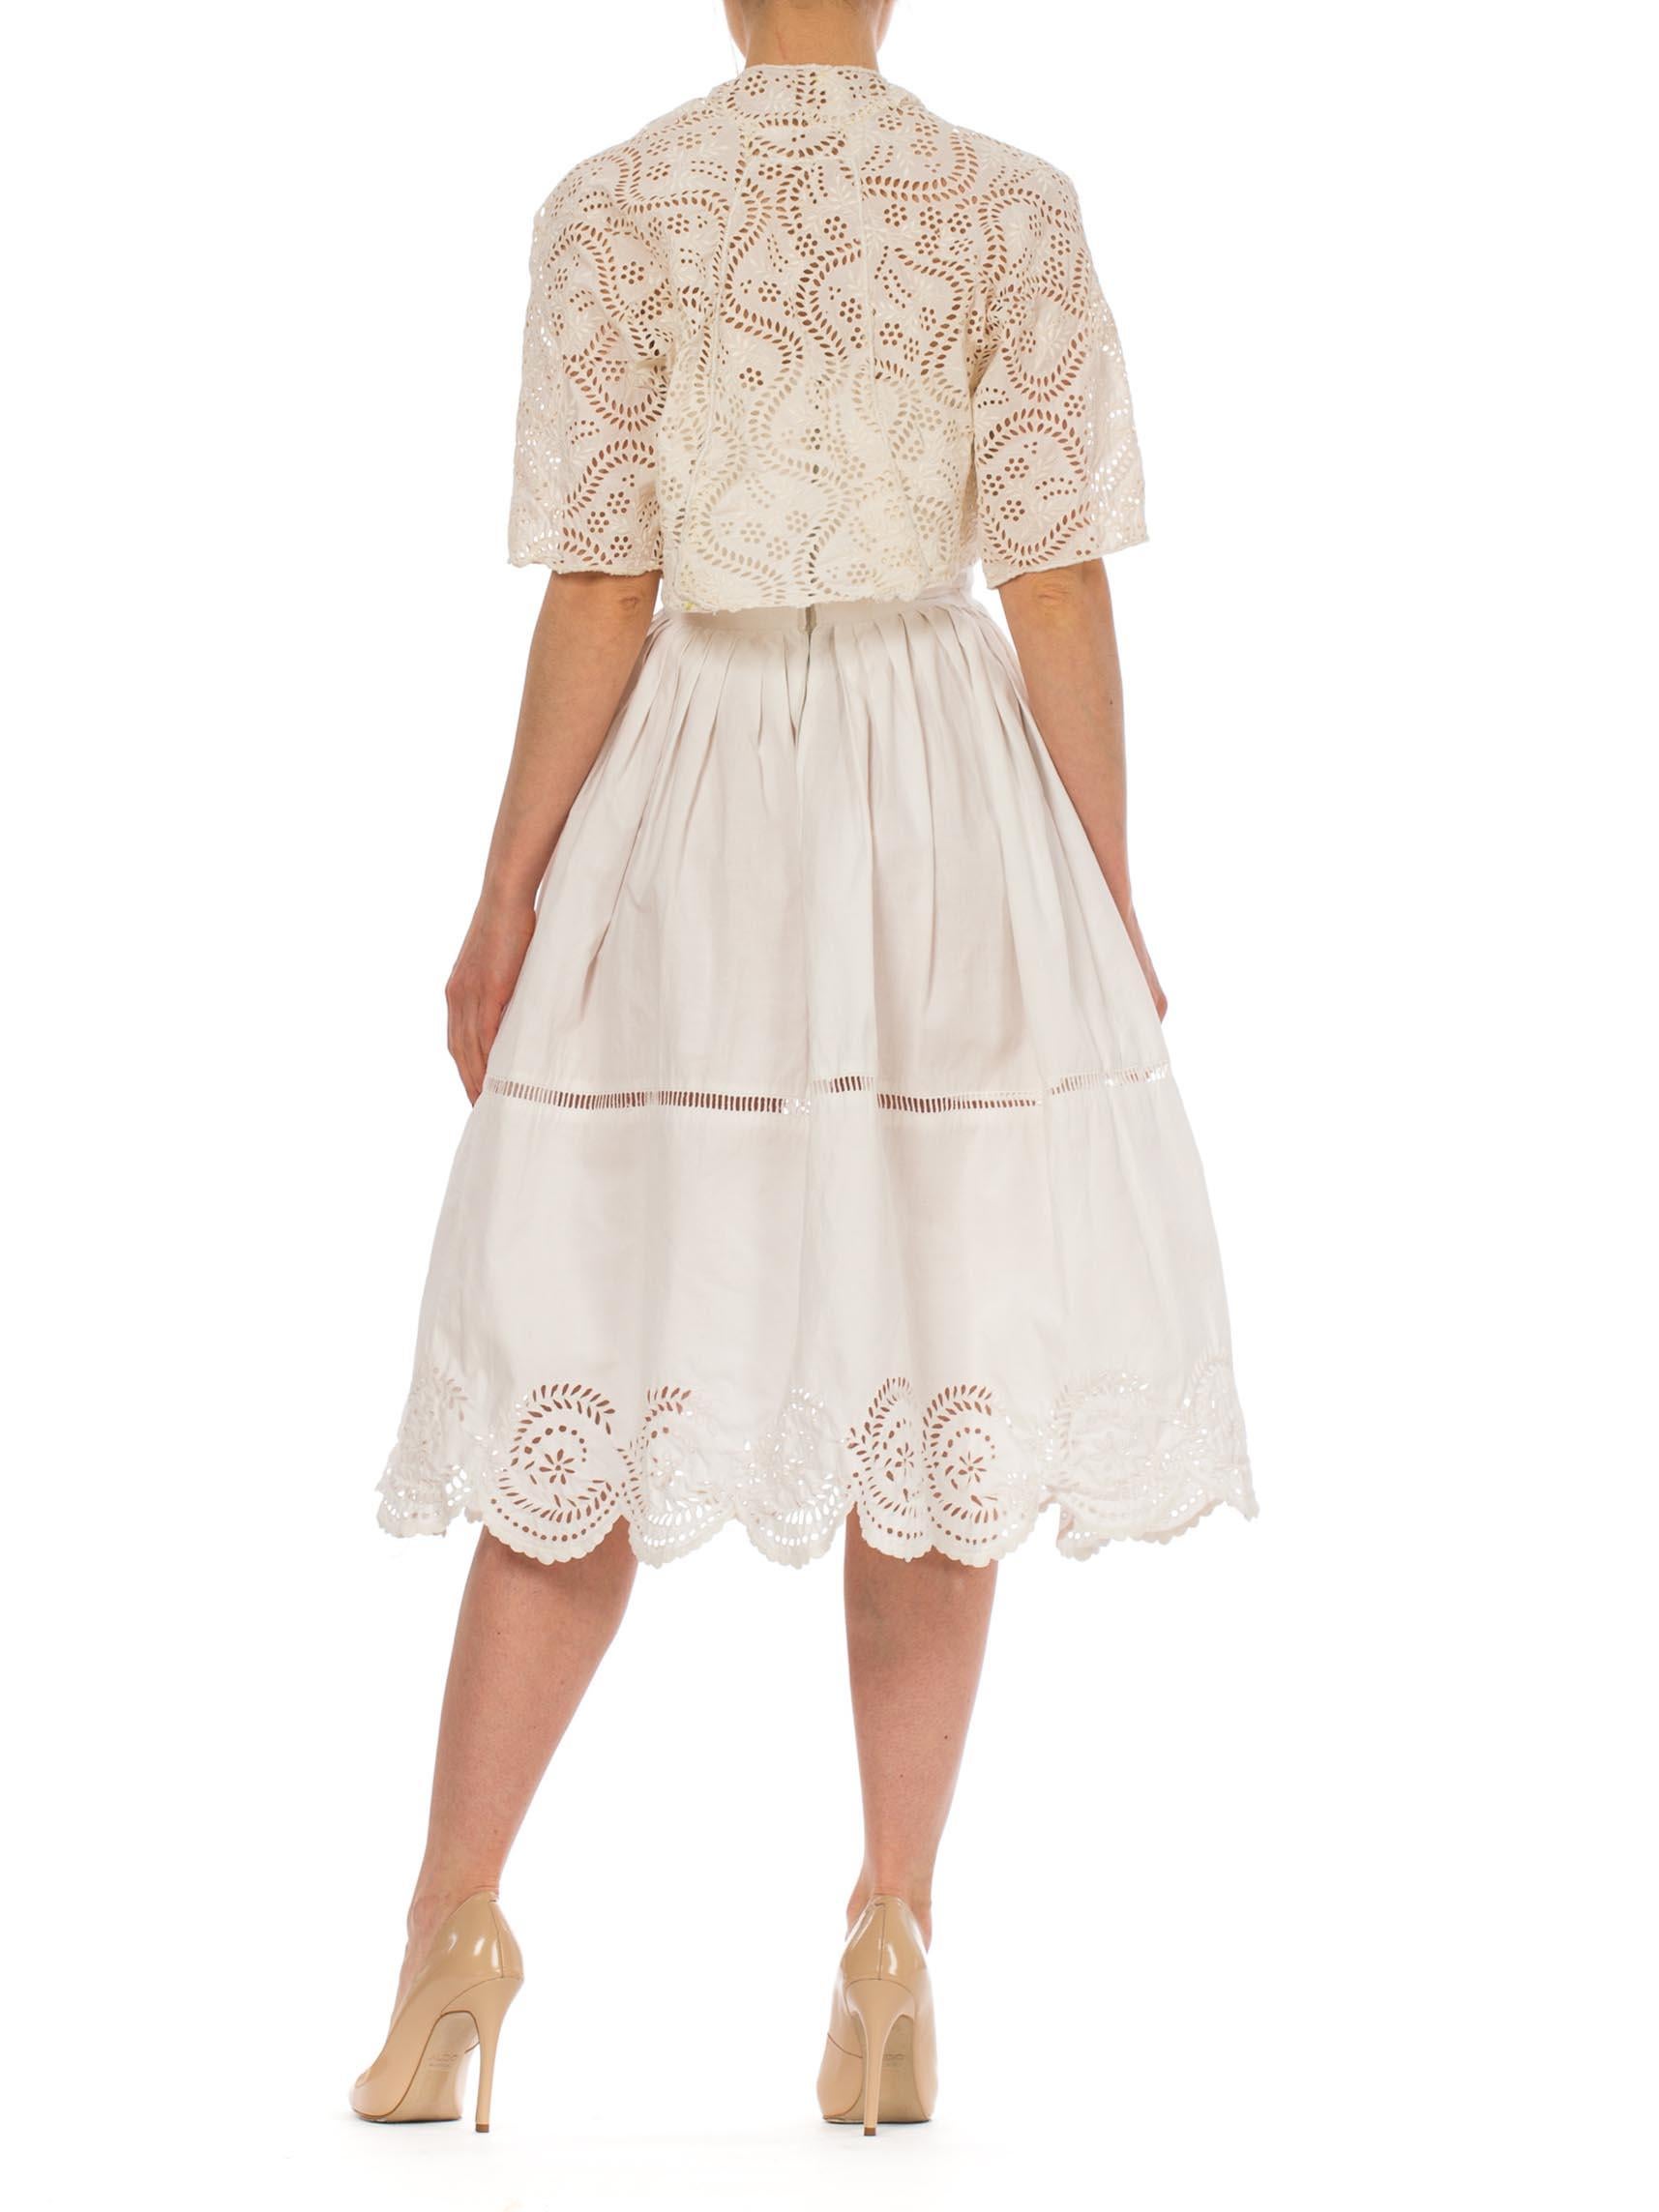 1950S Off White Strapless Dress Made From Victorian Hand Embroidered Cotton Eye For Sale 2